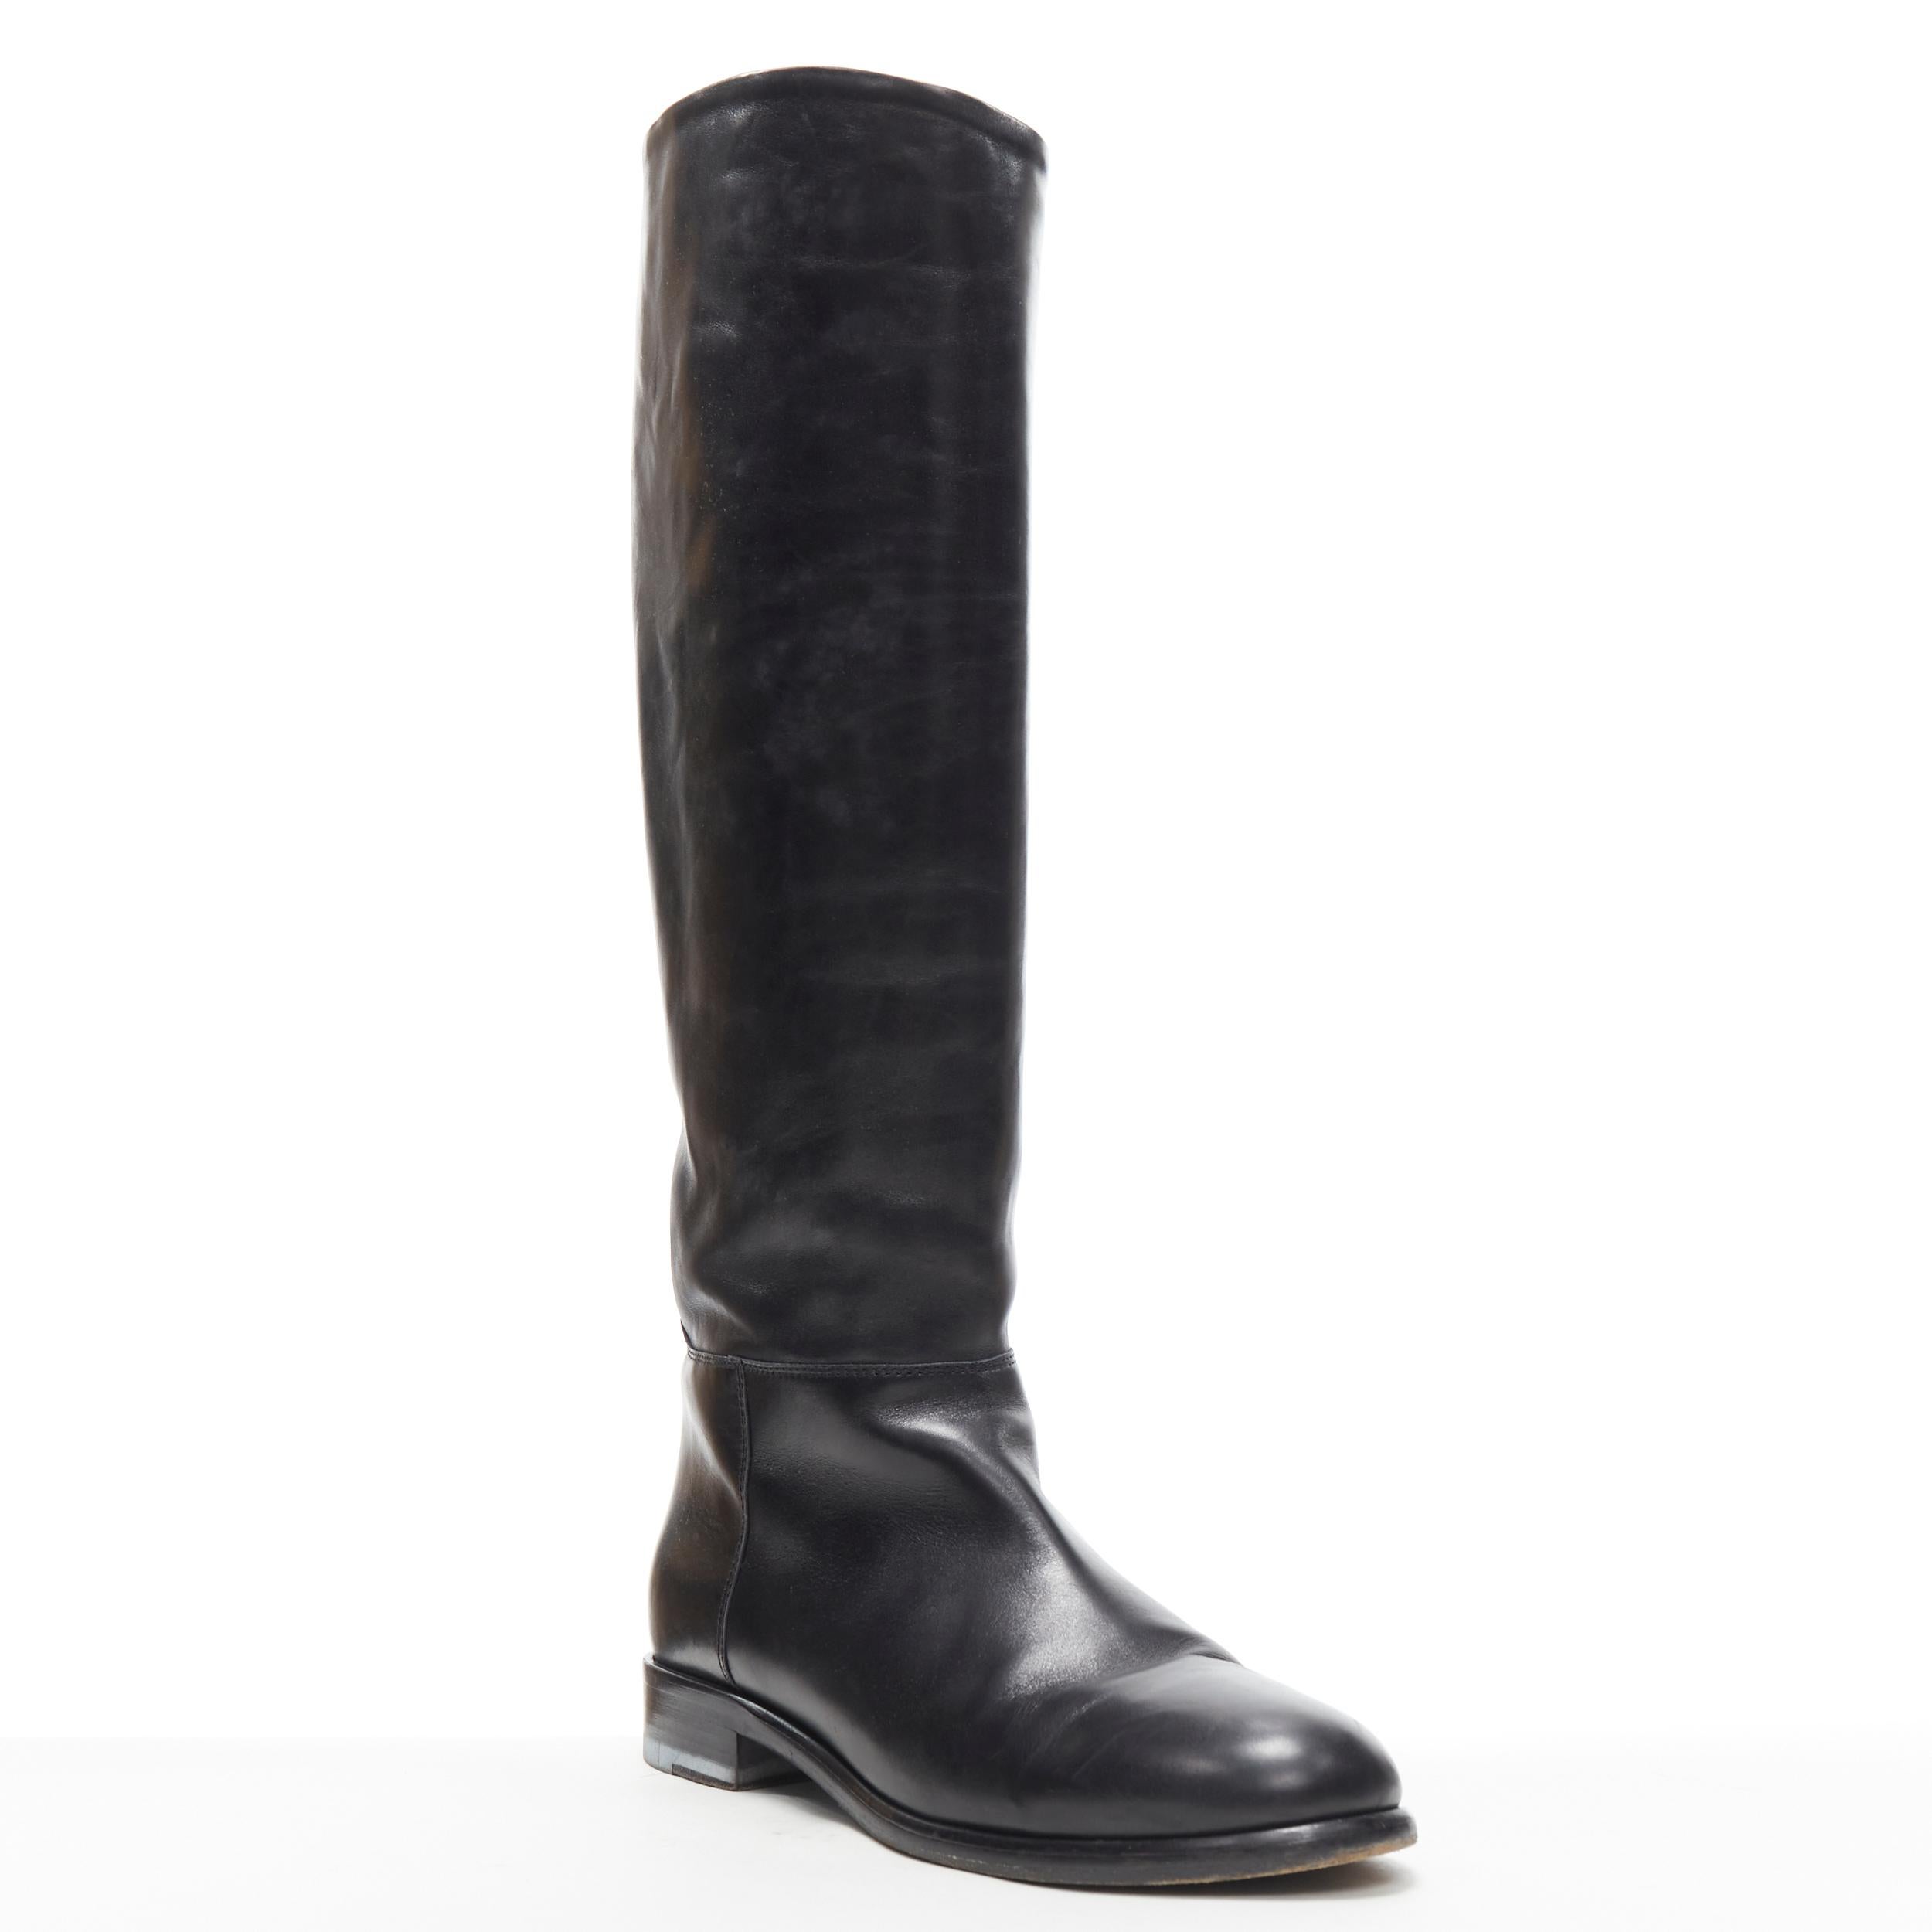 MARNI black smooth calf leather round toe flat pull on tall boot EU40.5 
Reference: UIHG/A00028 
Brand: Marni 
Material: Leather 
Color: Black 
Pattern: Solid 
Made in: Italy 

CONDITION: 
Condition: Very good, this item was pre-owned and is in very